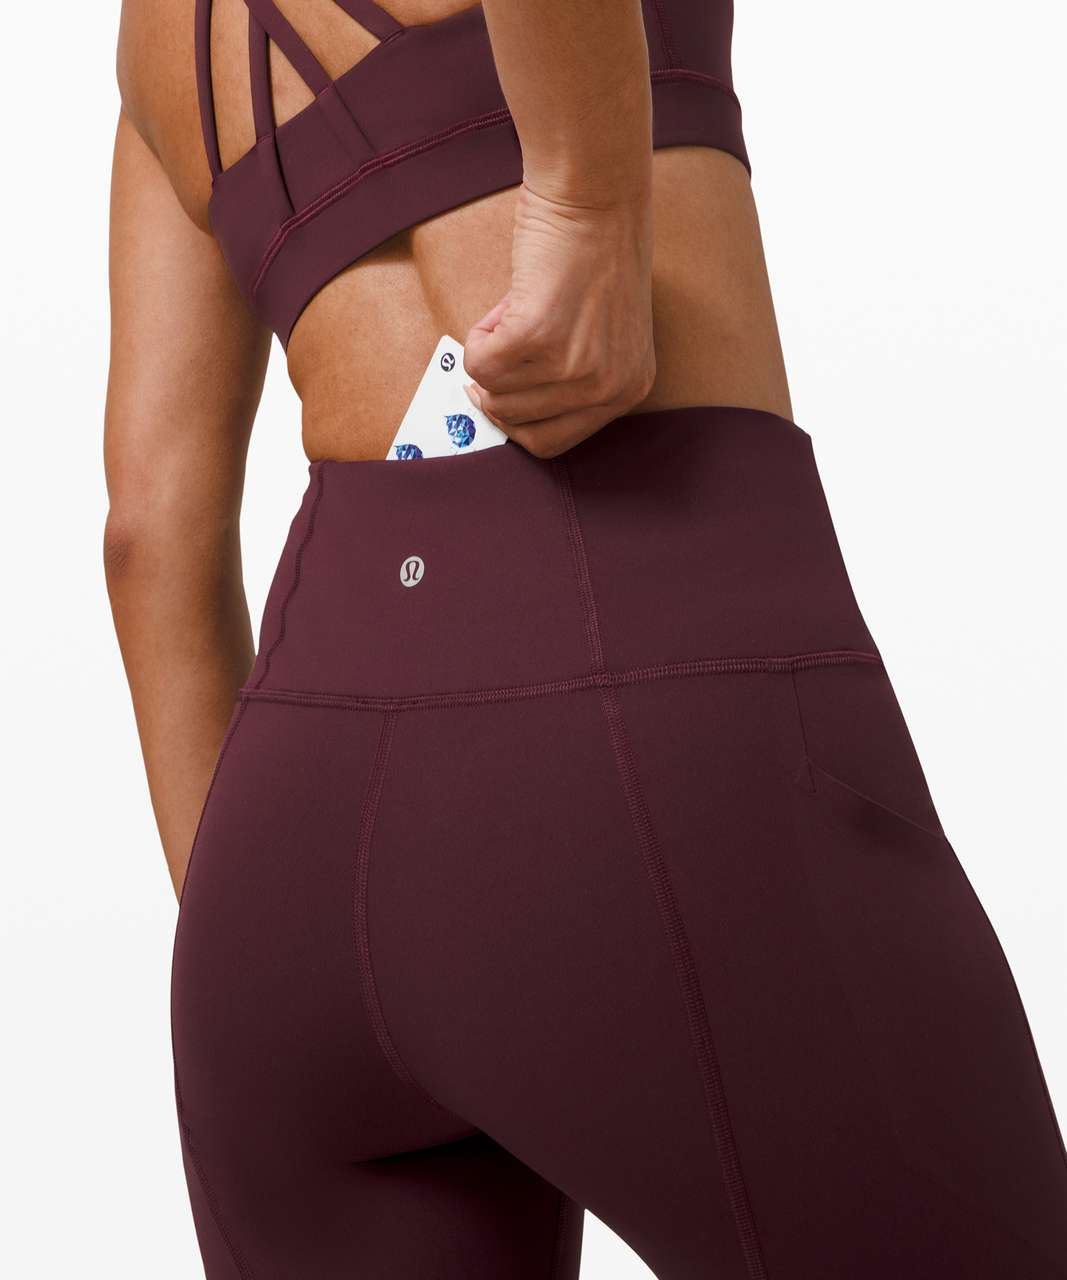 Lululemon Pace Rival High-Rise Crop 22" - Cassis